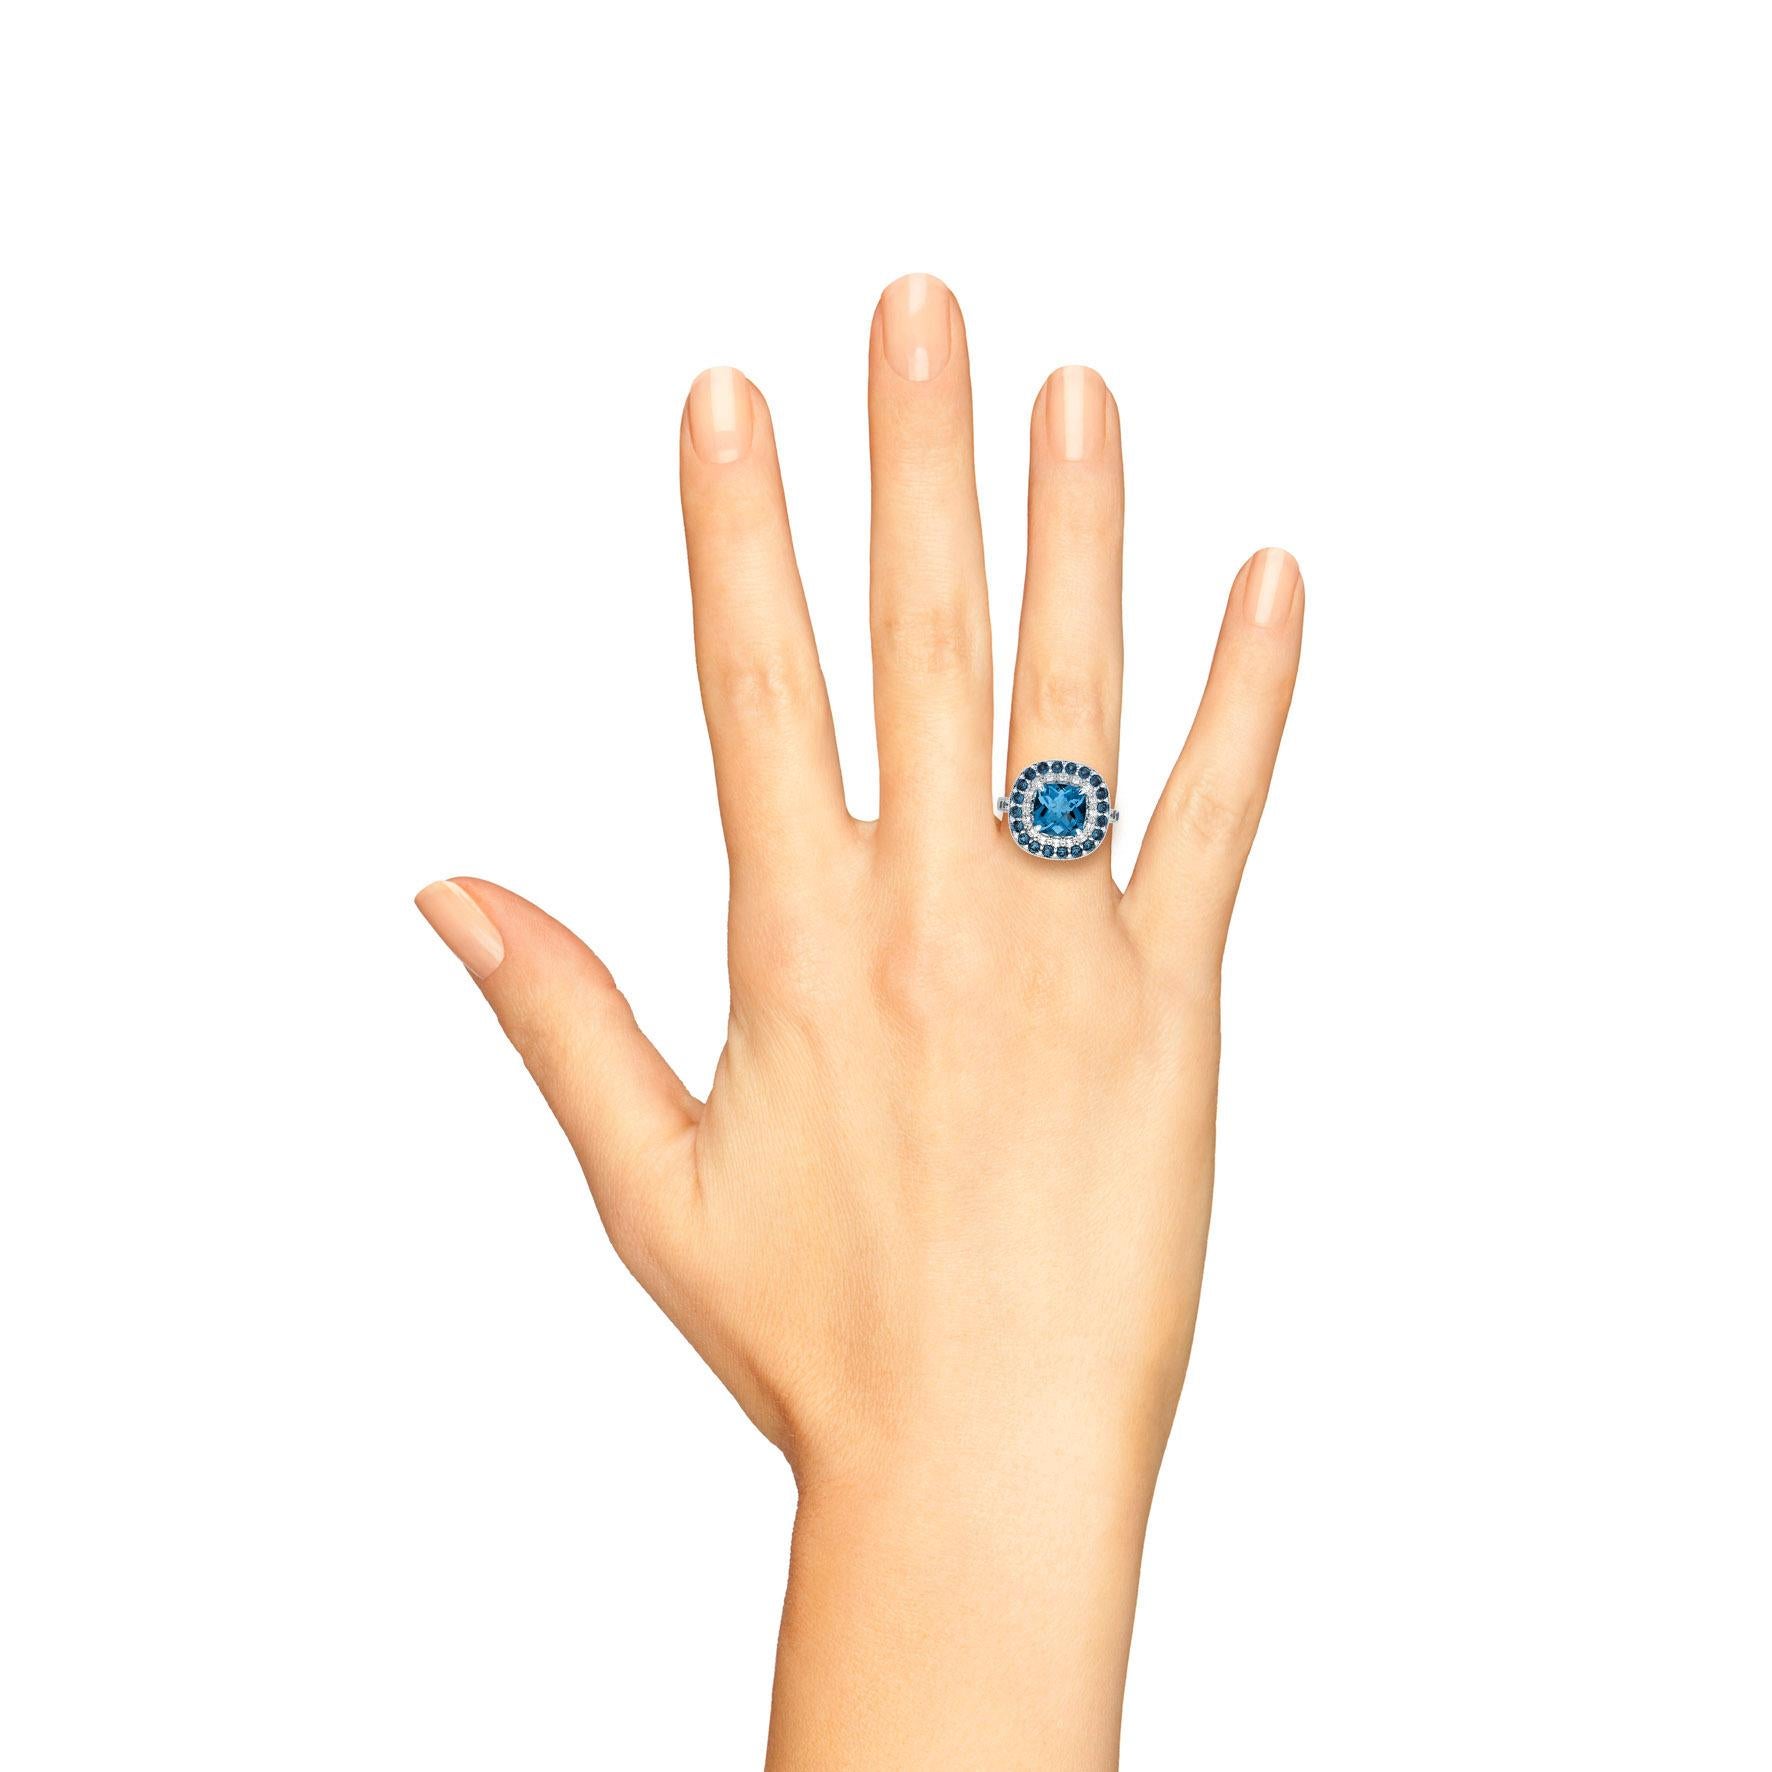 Indulge in pure luxury with this London Blue Topaz ring. Weighting in at an impressive 3 carats, the stunning gemstones emits an unparalleled brilliance that is simply breathtaking. Adorned with 20 diamonds and 30 topaz surrounding the center